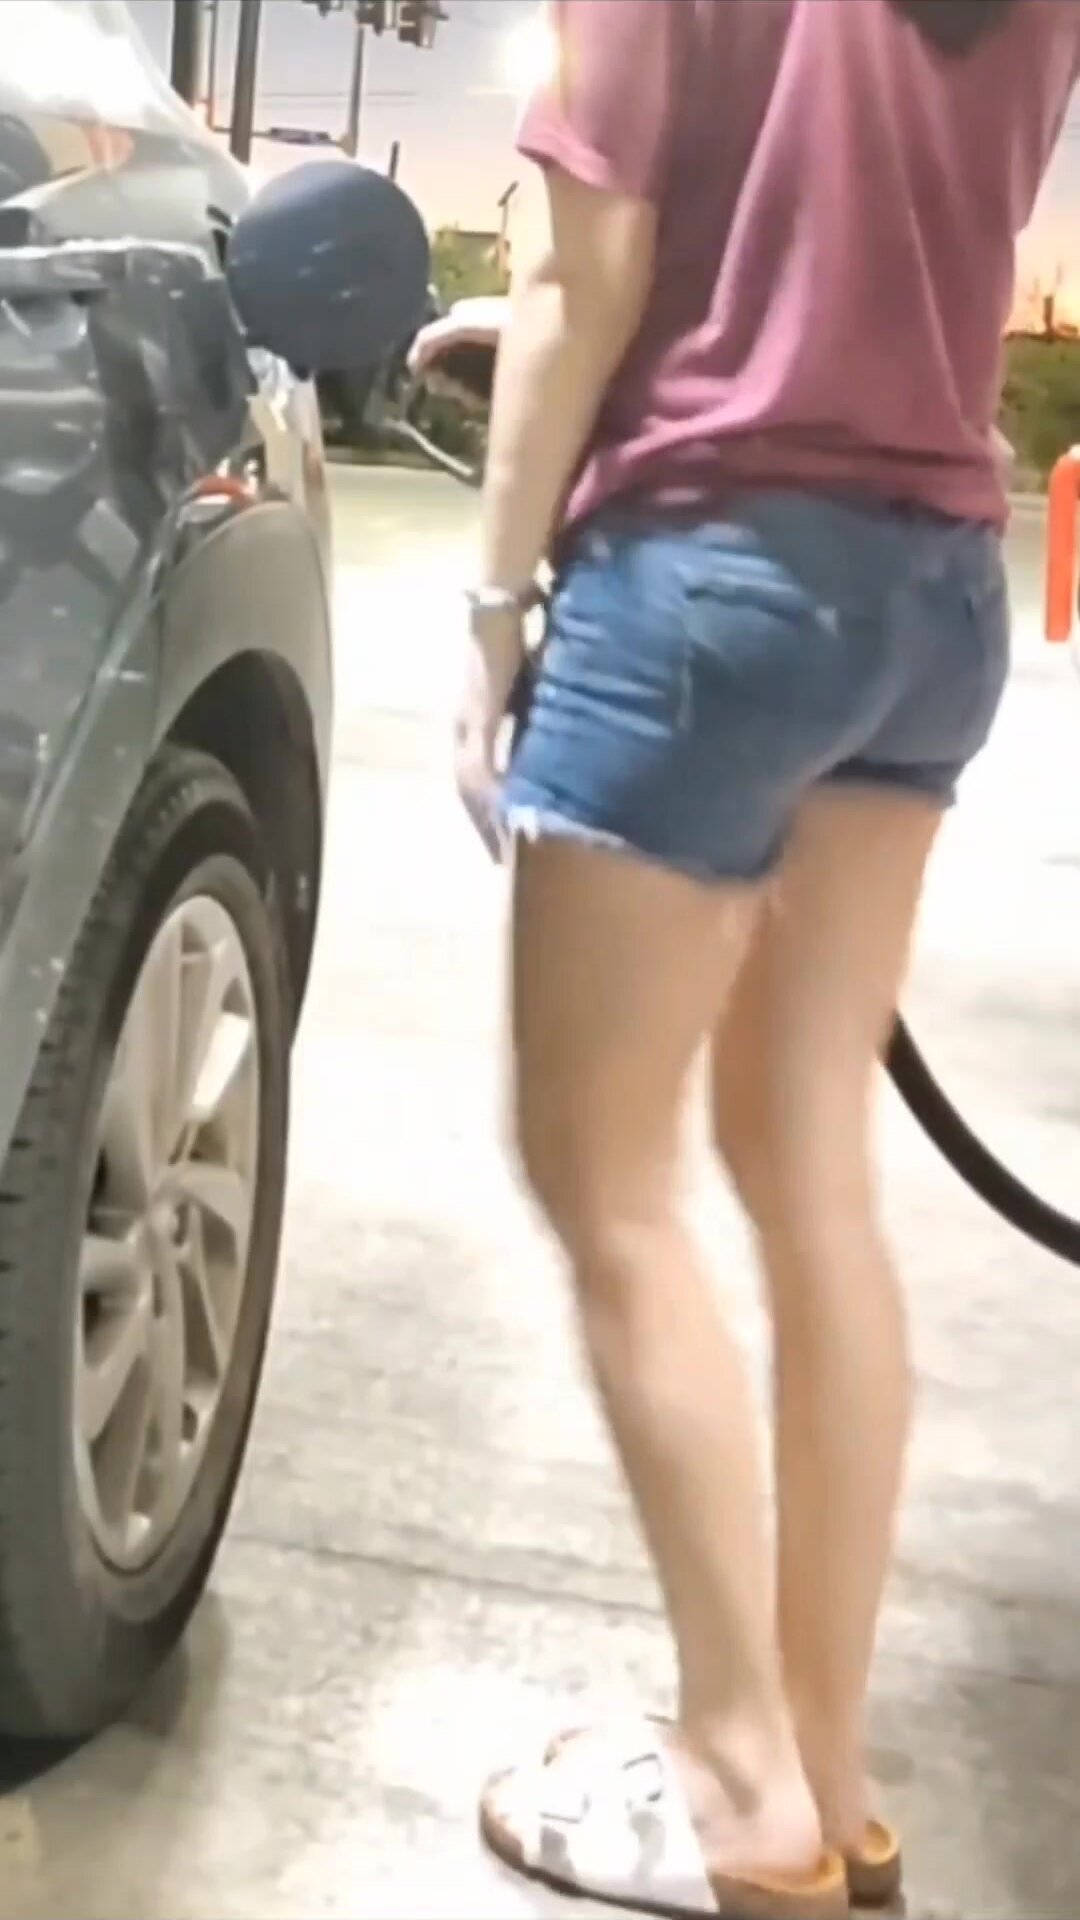 Pee at gas station - video 2